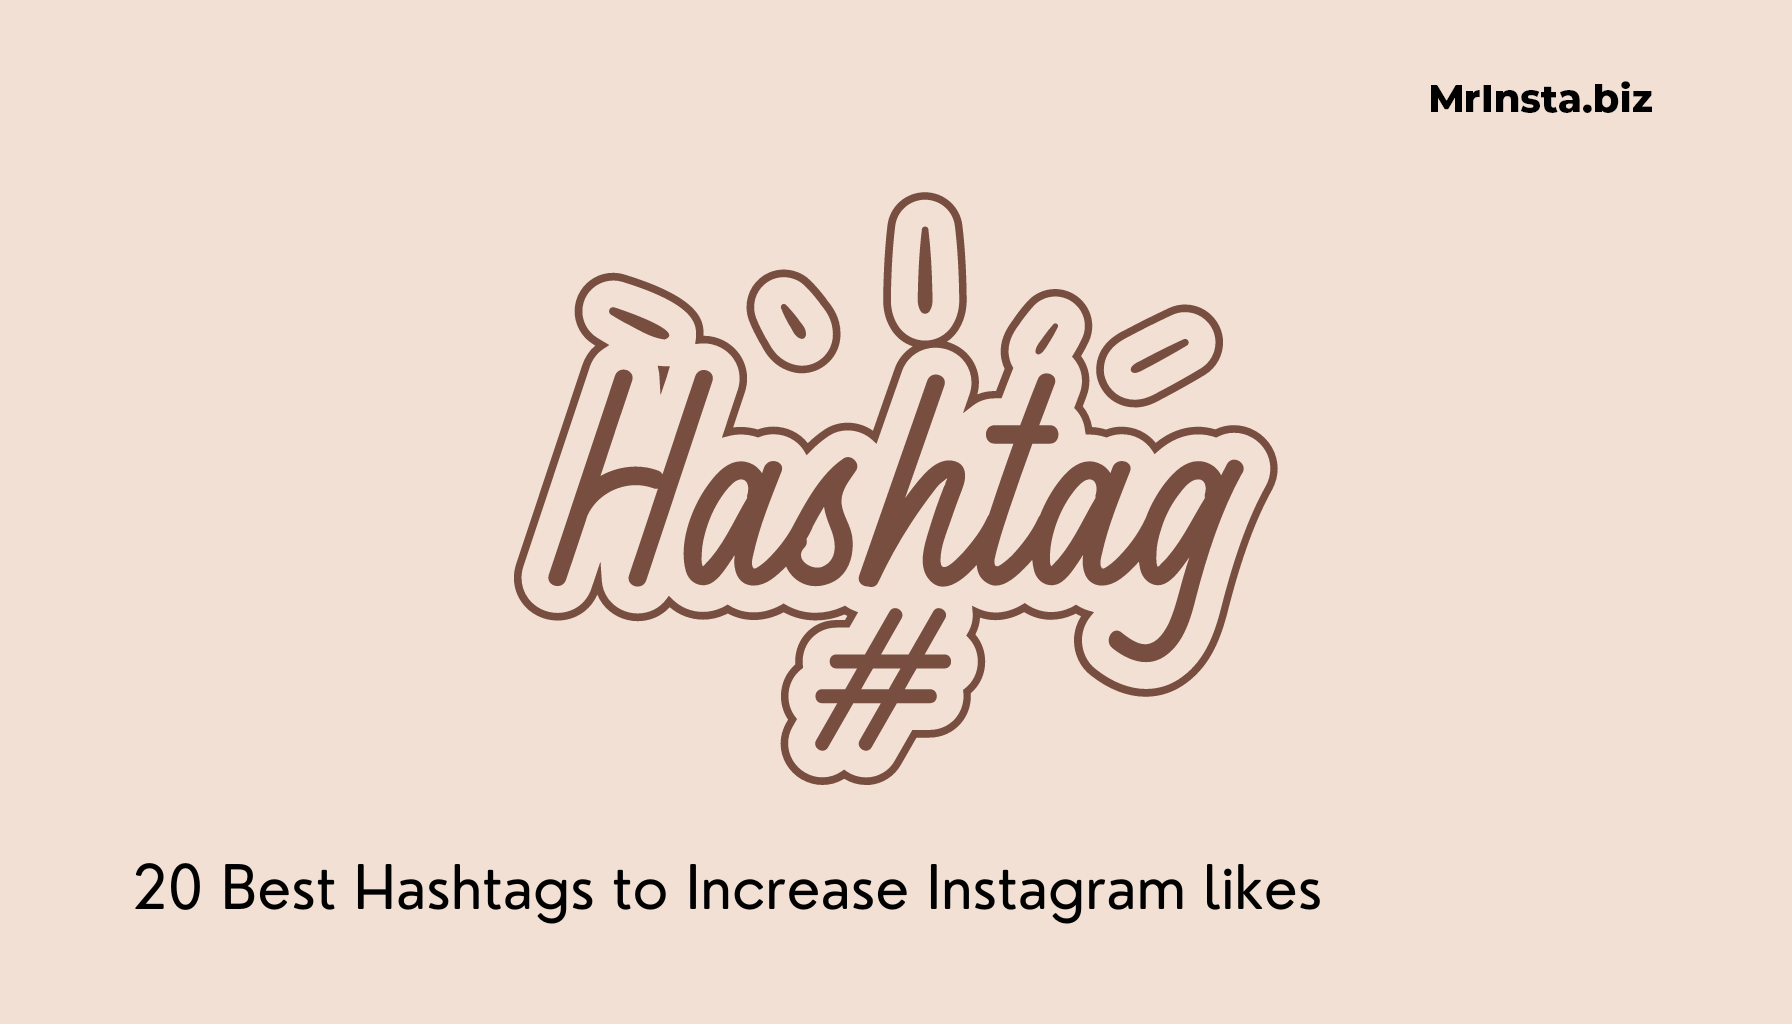 20 Best Hashtags to Increase Instagram likes